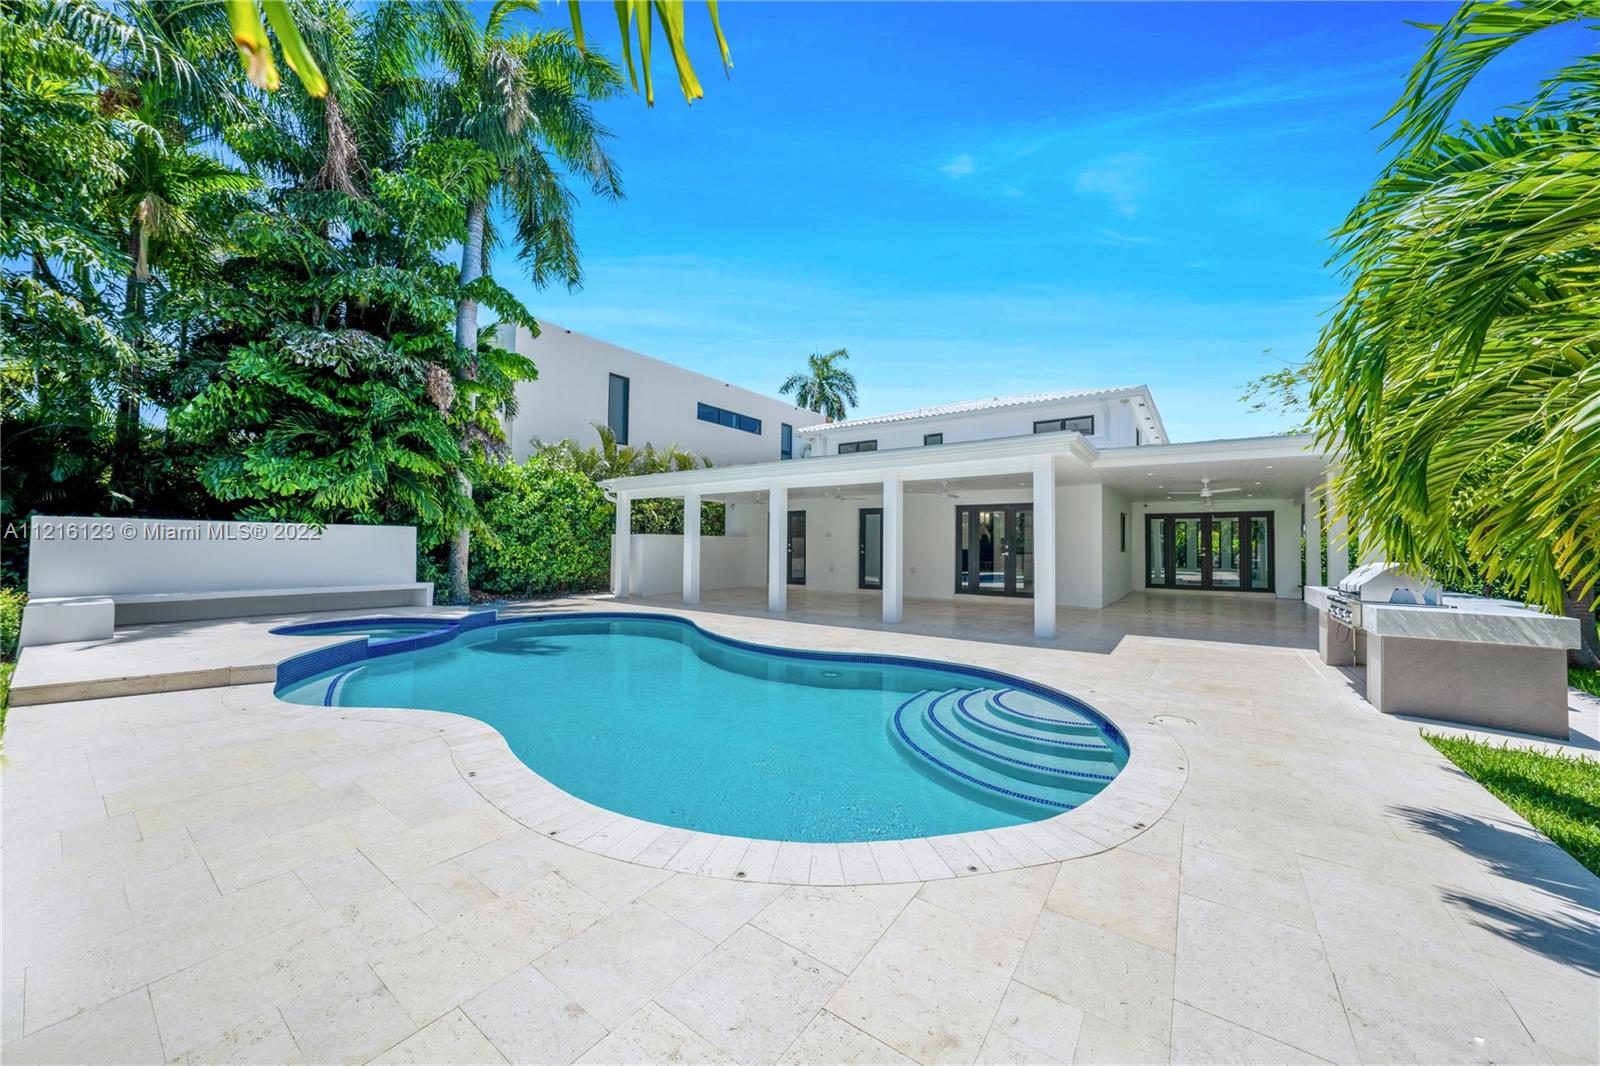 NEWLY RENOVATED PRISTINE WHITE TROPICAL VILLA OVERLOOKING PRESTIGIOUS MIAMI BEACH GOLF COURSE WITH STUNNING SUNSET VIEWS! Modernized Home on Huge 11,400 SF Gated Corner LOT. Prime Location on Meridian Ave w/ Great Walkability. 4 Beds + 3.5 Baths in 4,322 Total SF. Entertaining Spaces w/ Recessed Lighting & Vaulted Ceilings + Dining Area w/ Indirect Lighting. Chef’s Eat-in Kitchen w/ Quartz Countertops, SS Appliances & Viking Gas Range. Primary Suite + Terrace w/ Golf Course Views. Primary Bath w/ Walk-in Closet + Steam Rainshower. 2nd Floor Deck can be Converted to Additional Outdoor Space. Deck & Covered Loggia off Kitchen. Outdoor Bar w/ BBQ, Saltwater Heated Pool + Spa. Linear Air Diffusers & Surround Sound Speakers. Great for Car Enthusiasts w/ Parking for 7+ Cars.